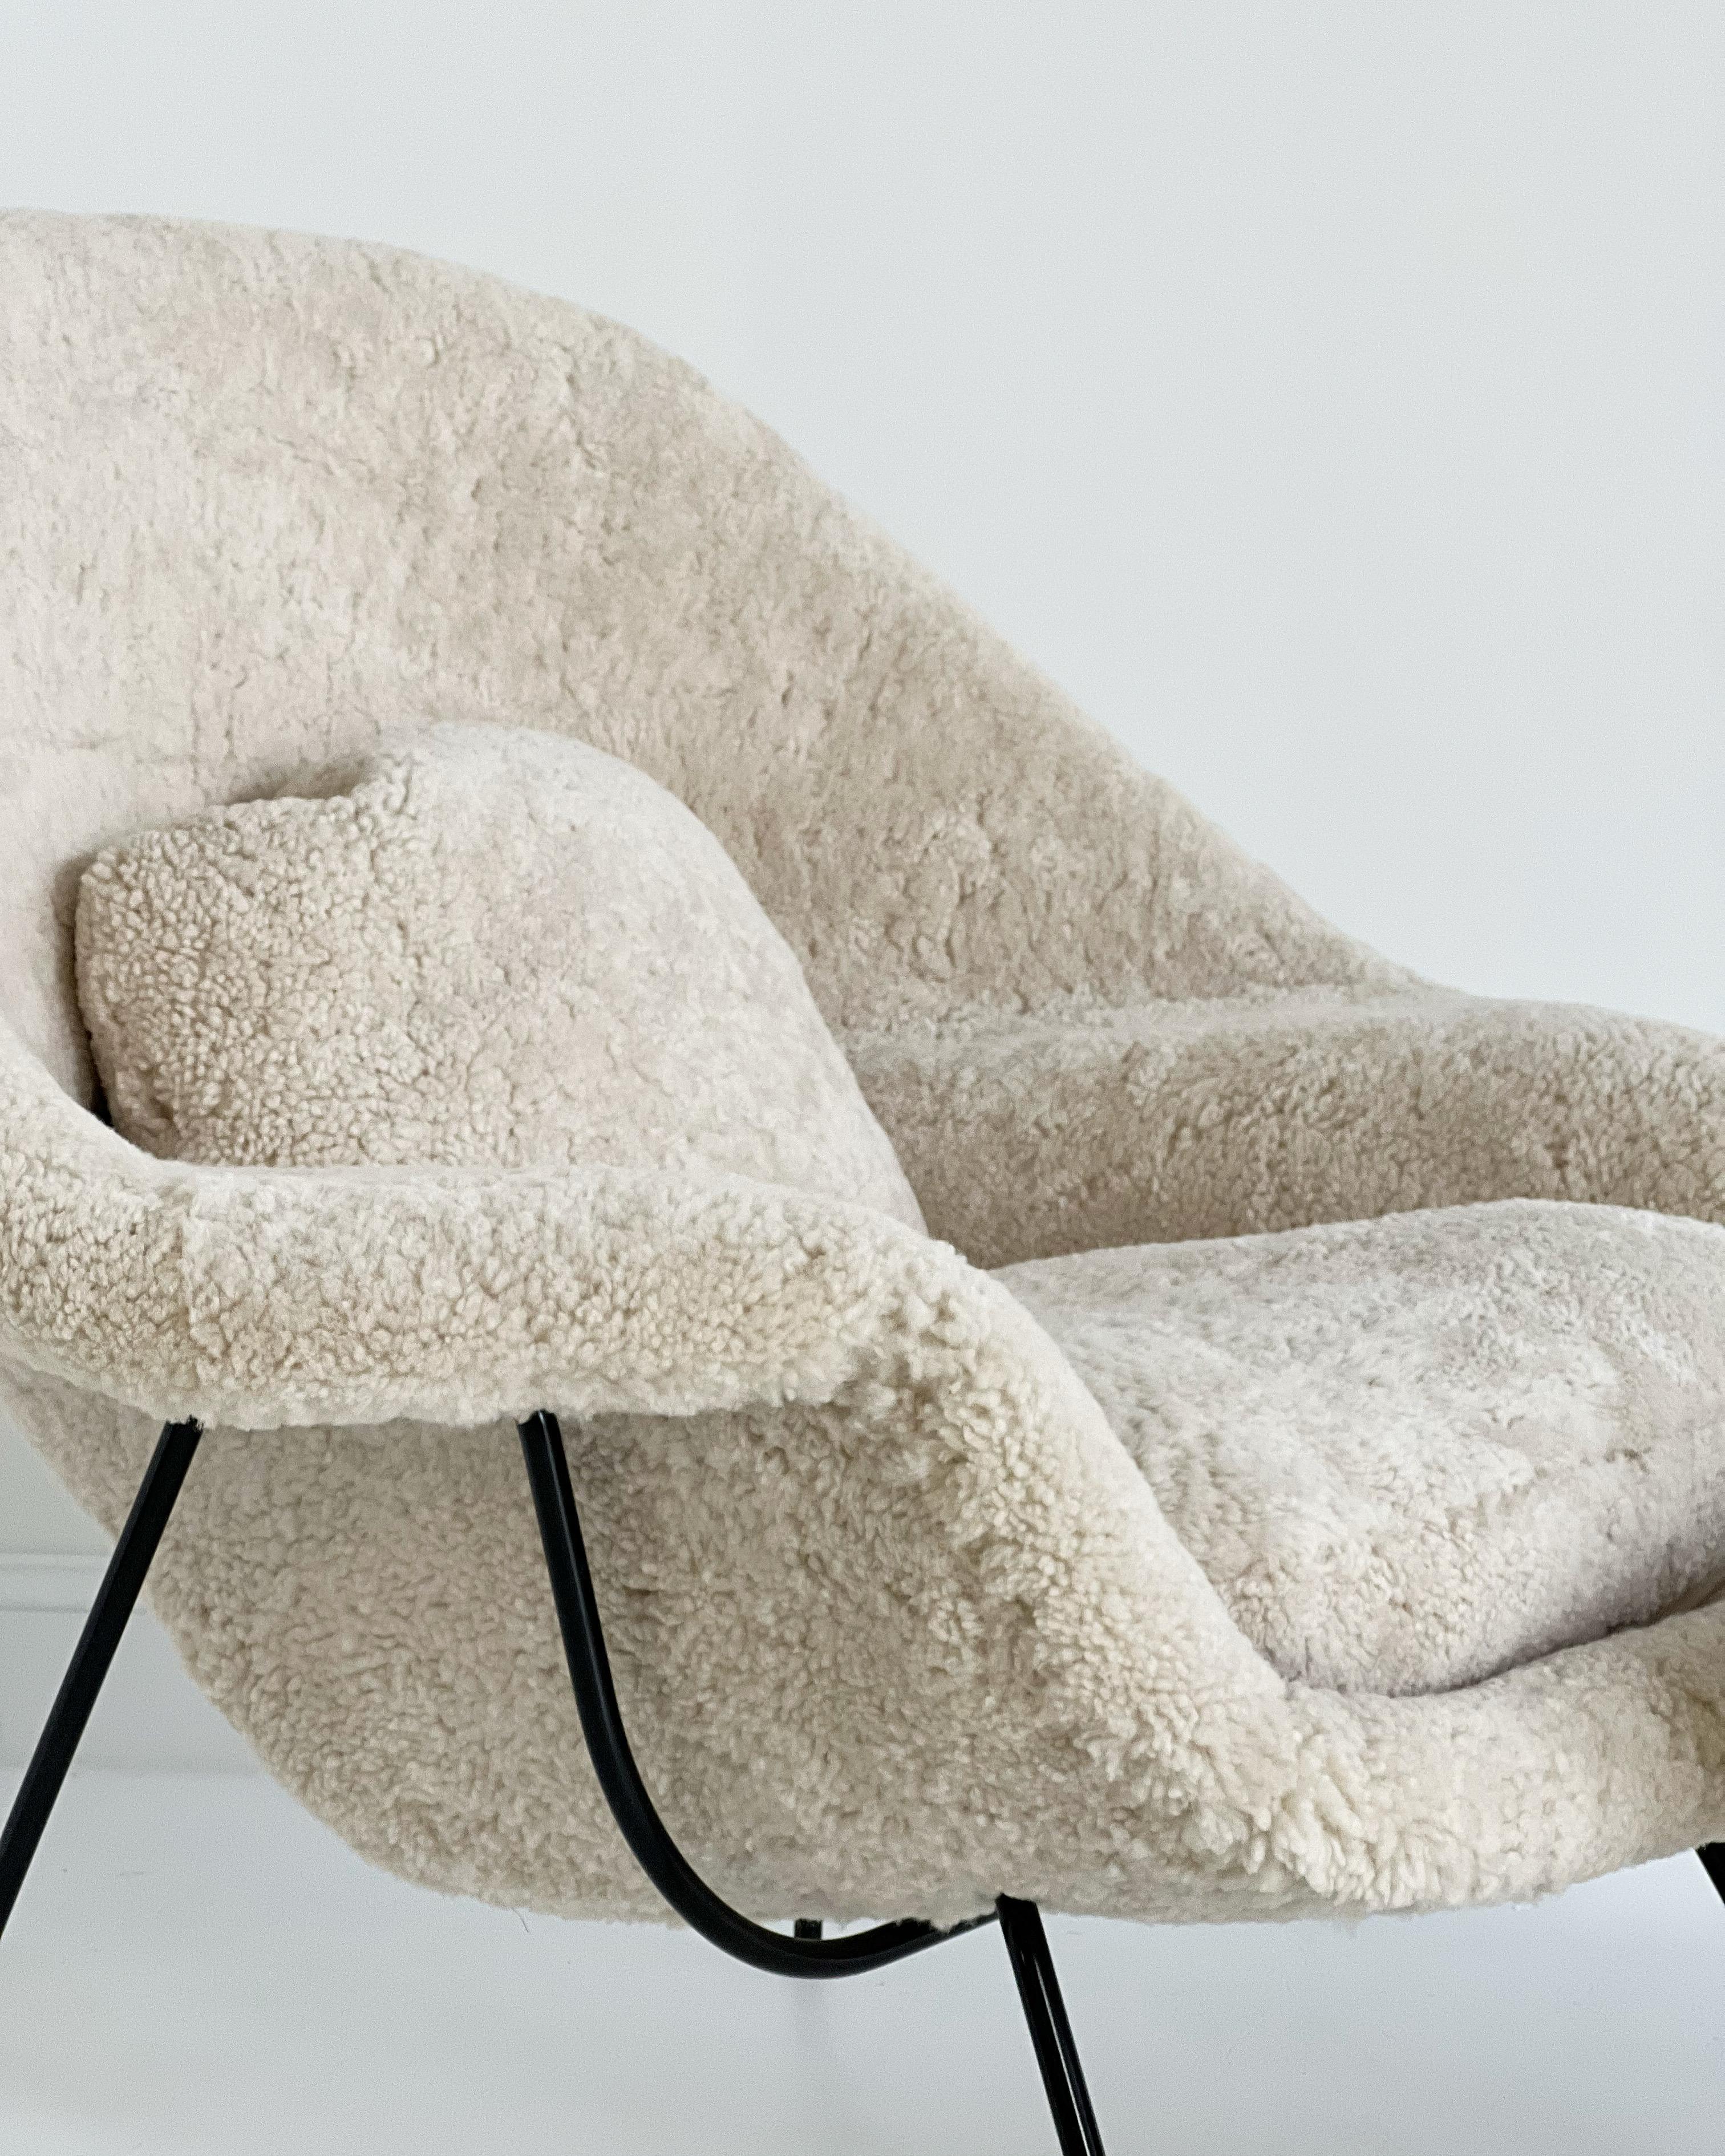 American Forsyth Bespoke Eero Saarinen Womb Chair and Ottoman in Shearling For Sale